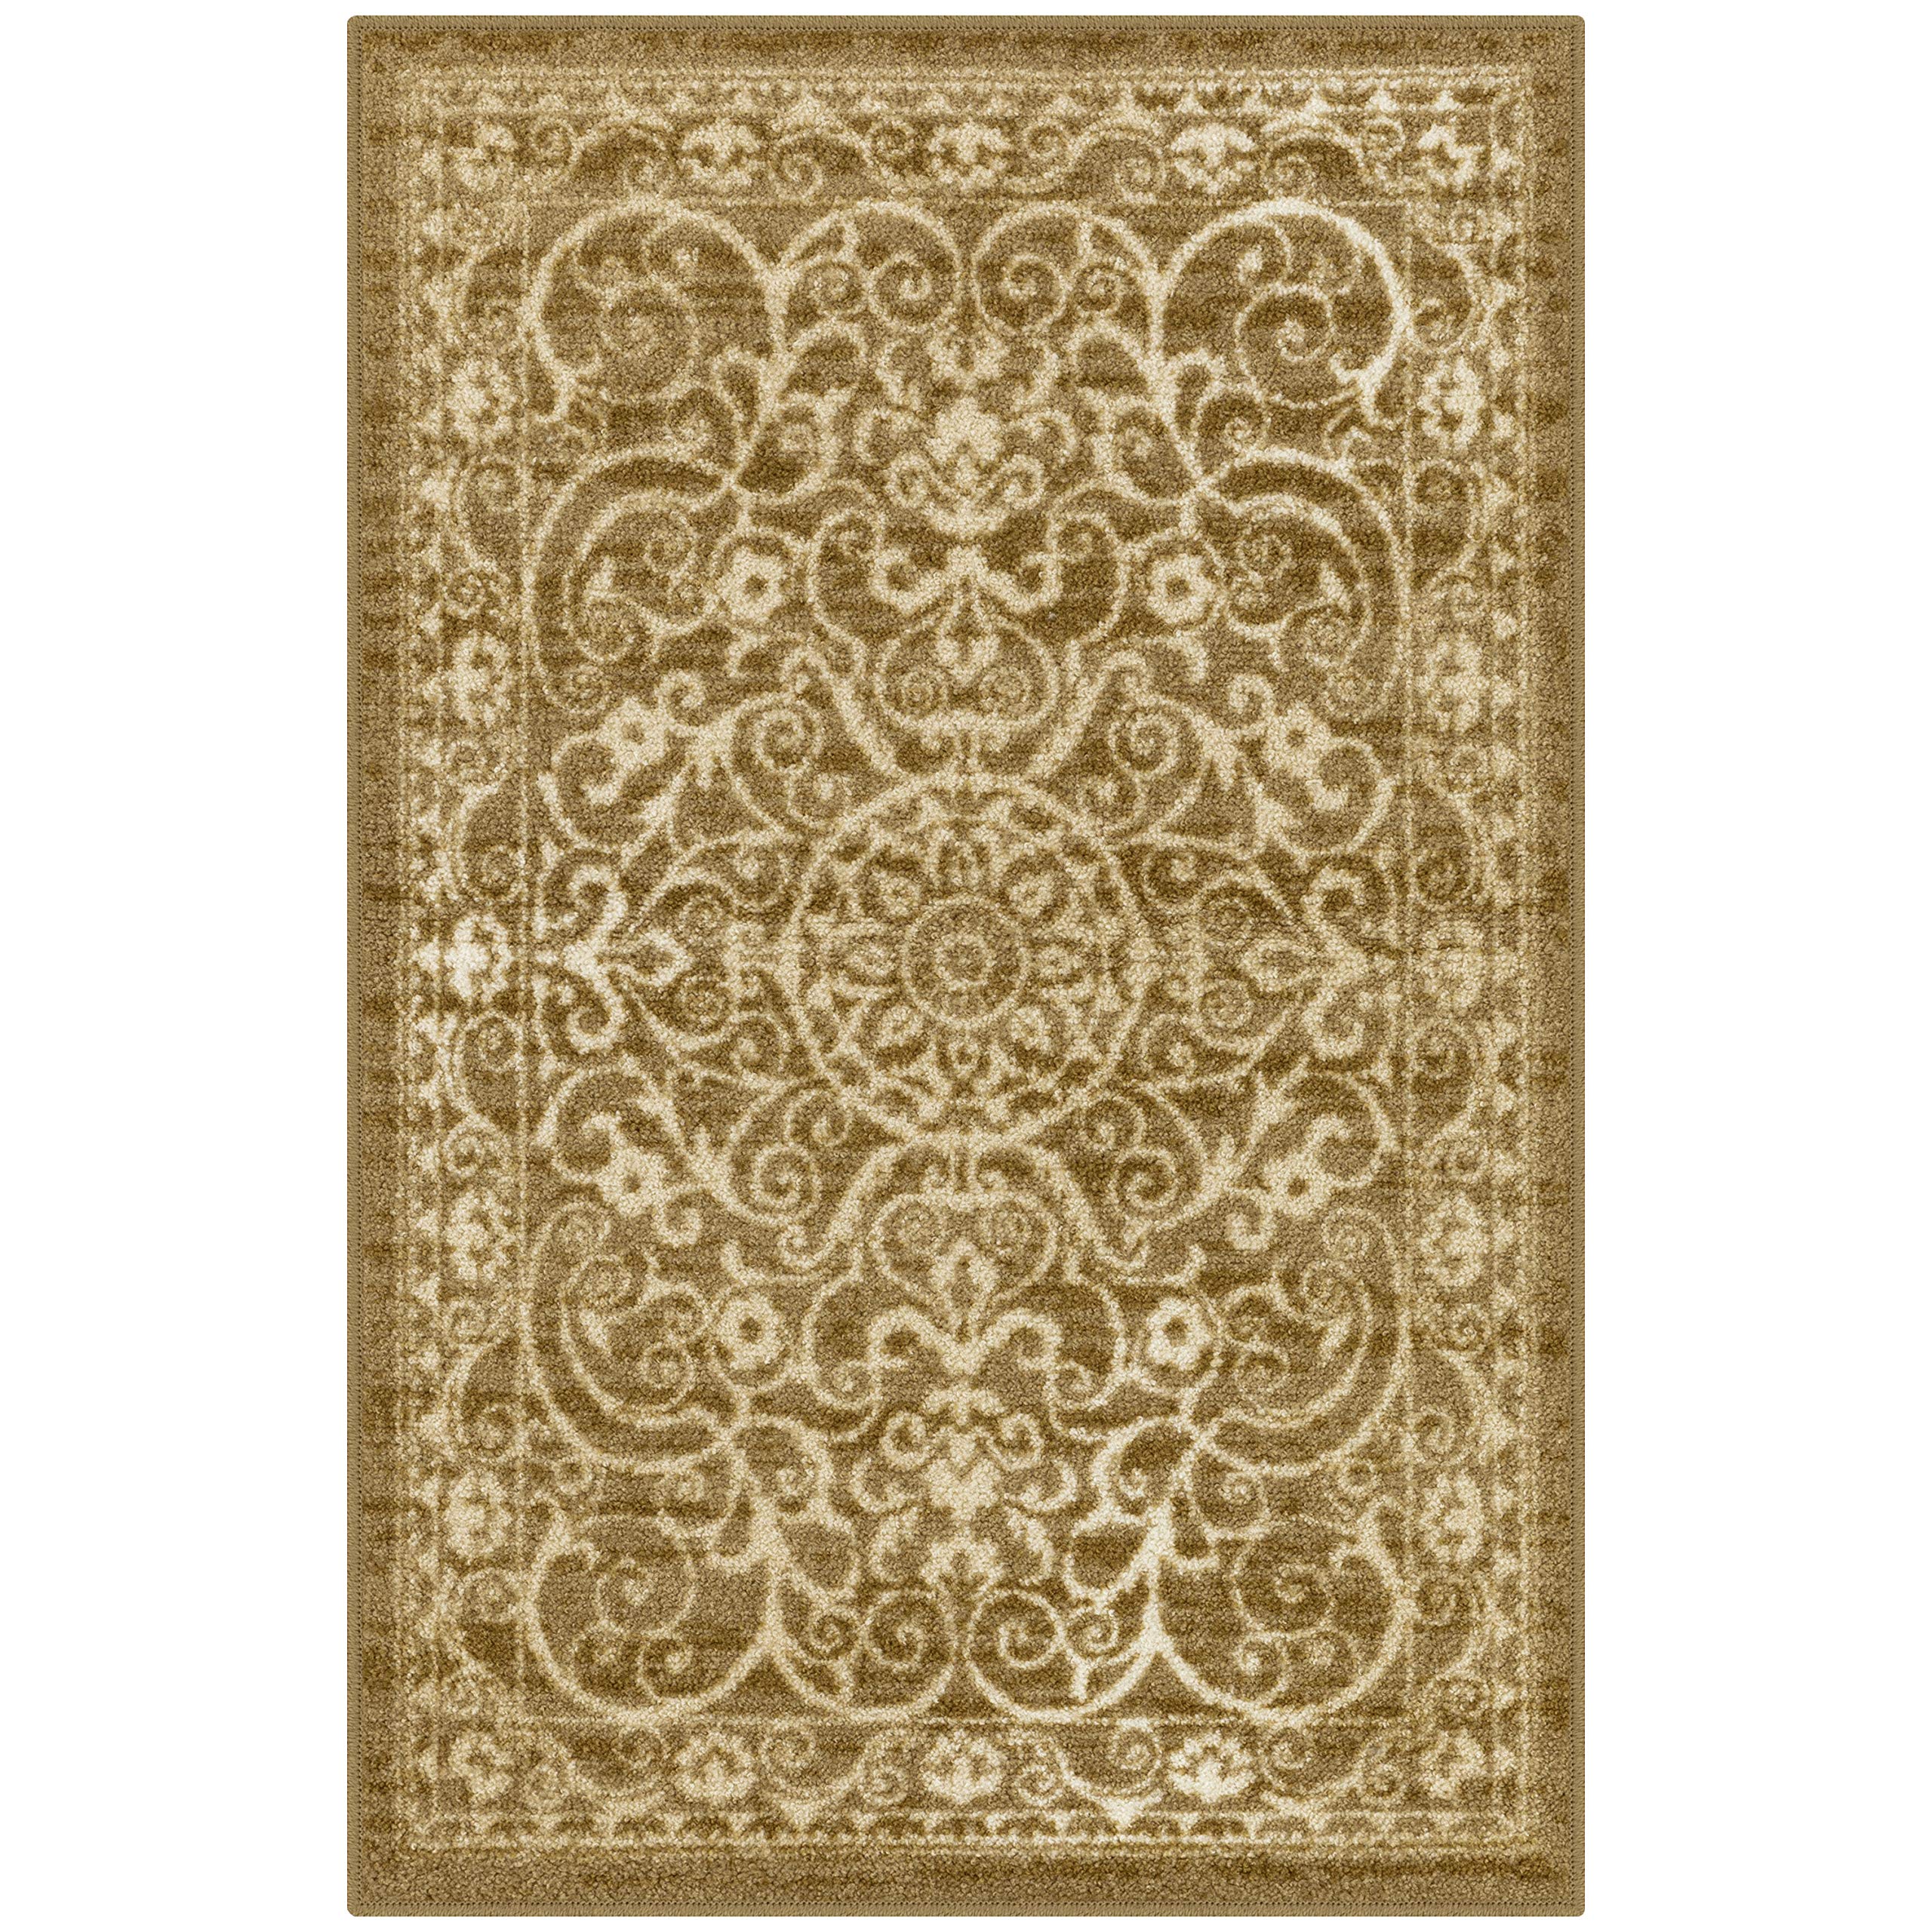 Maples Rugs Pelham Vintage Kitchen Rugs Non Skid Accent Area Carpet [Made in USA], 2'6 x 3'10, Khaki, Model:AG4055401